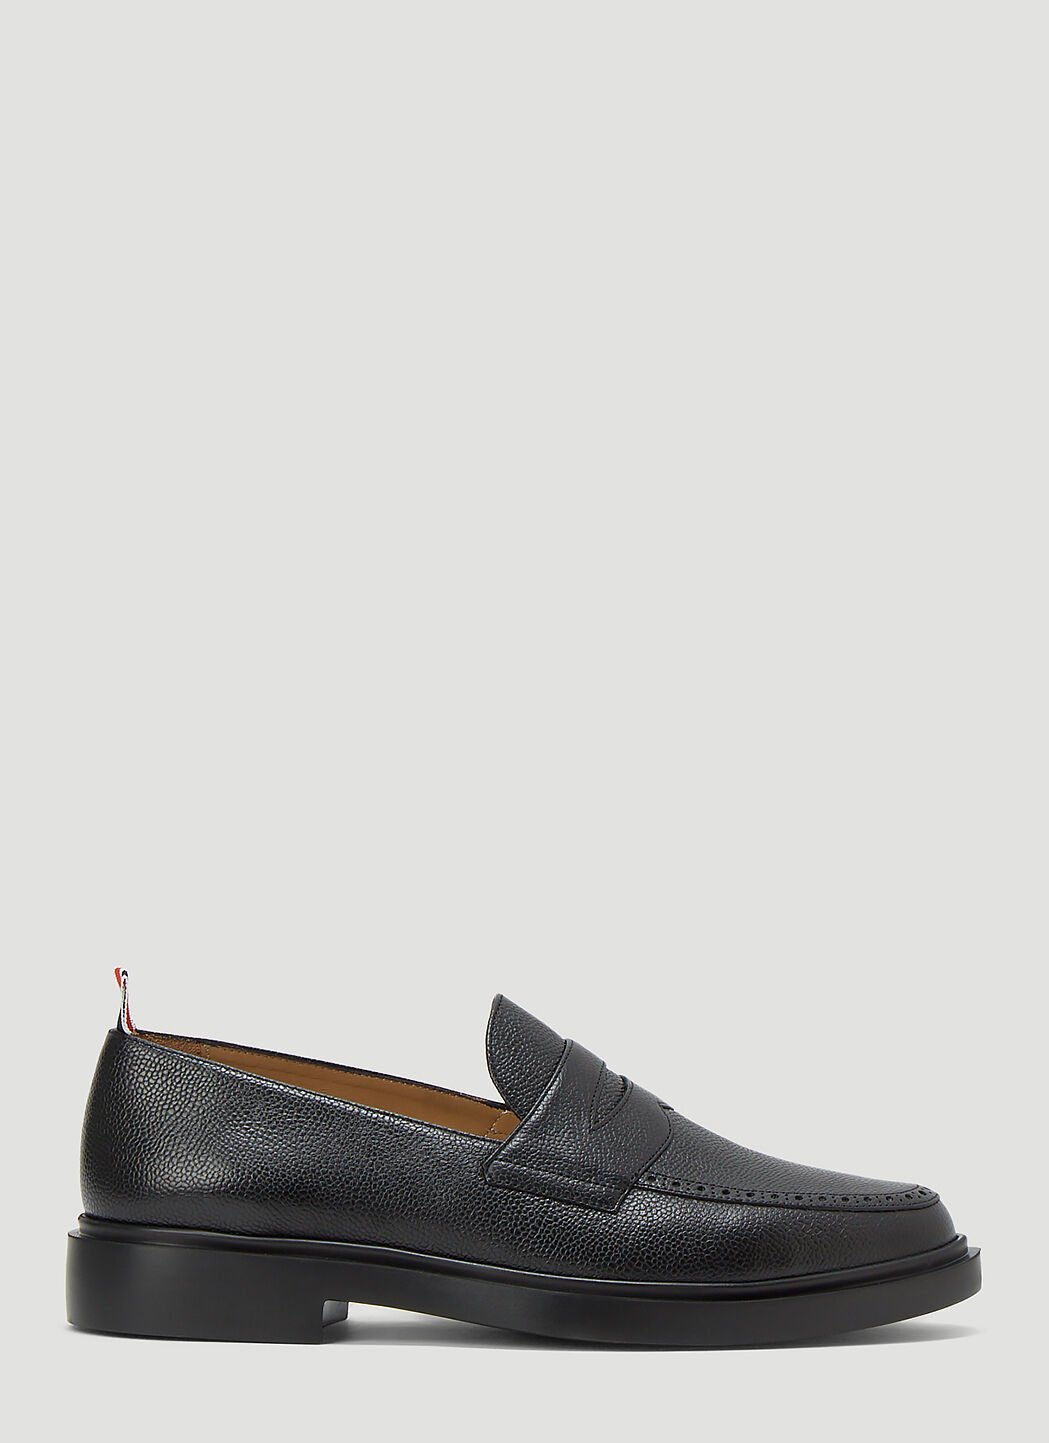 Thom Browne Slip-On Loafers Blue thb0155014